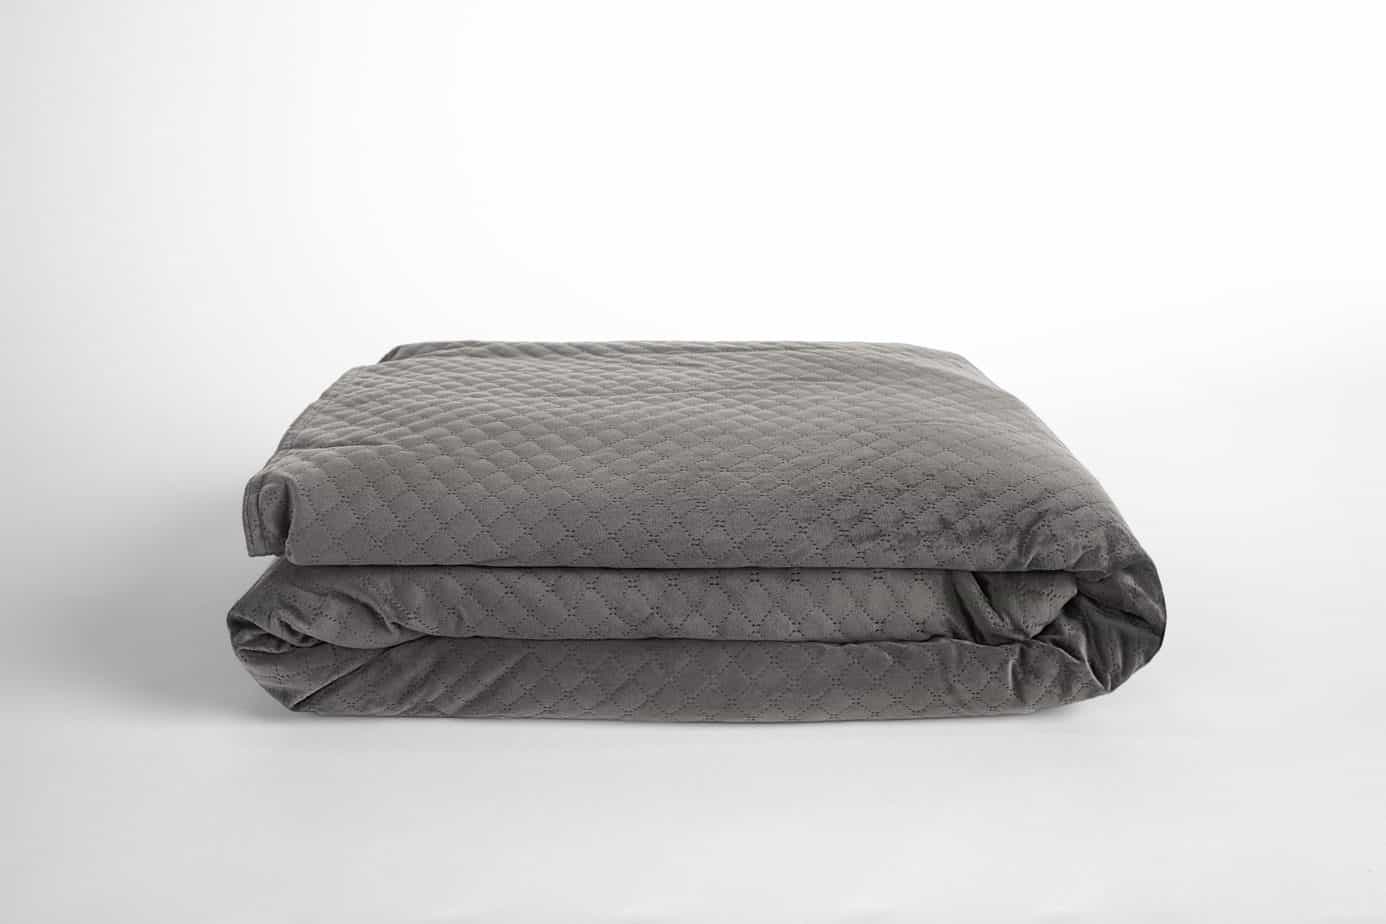 A gray colored blanket